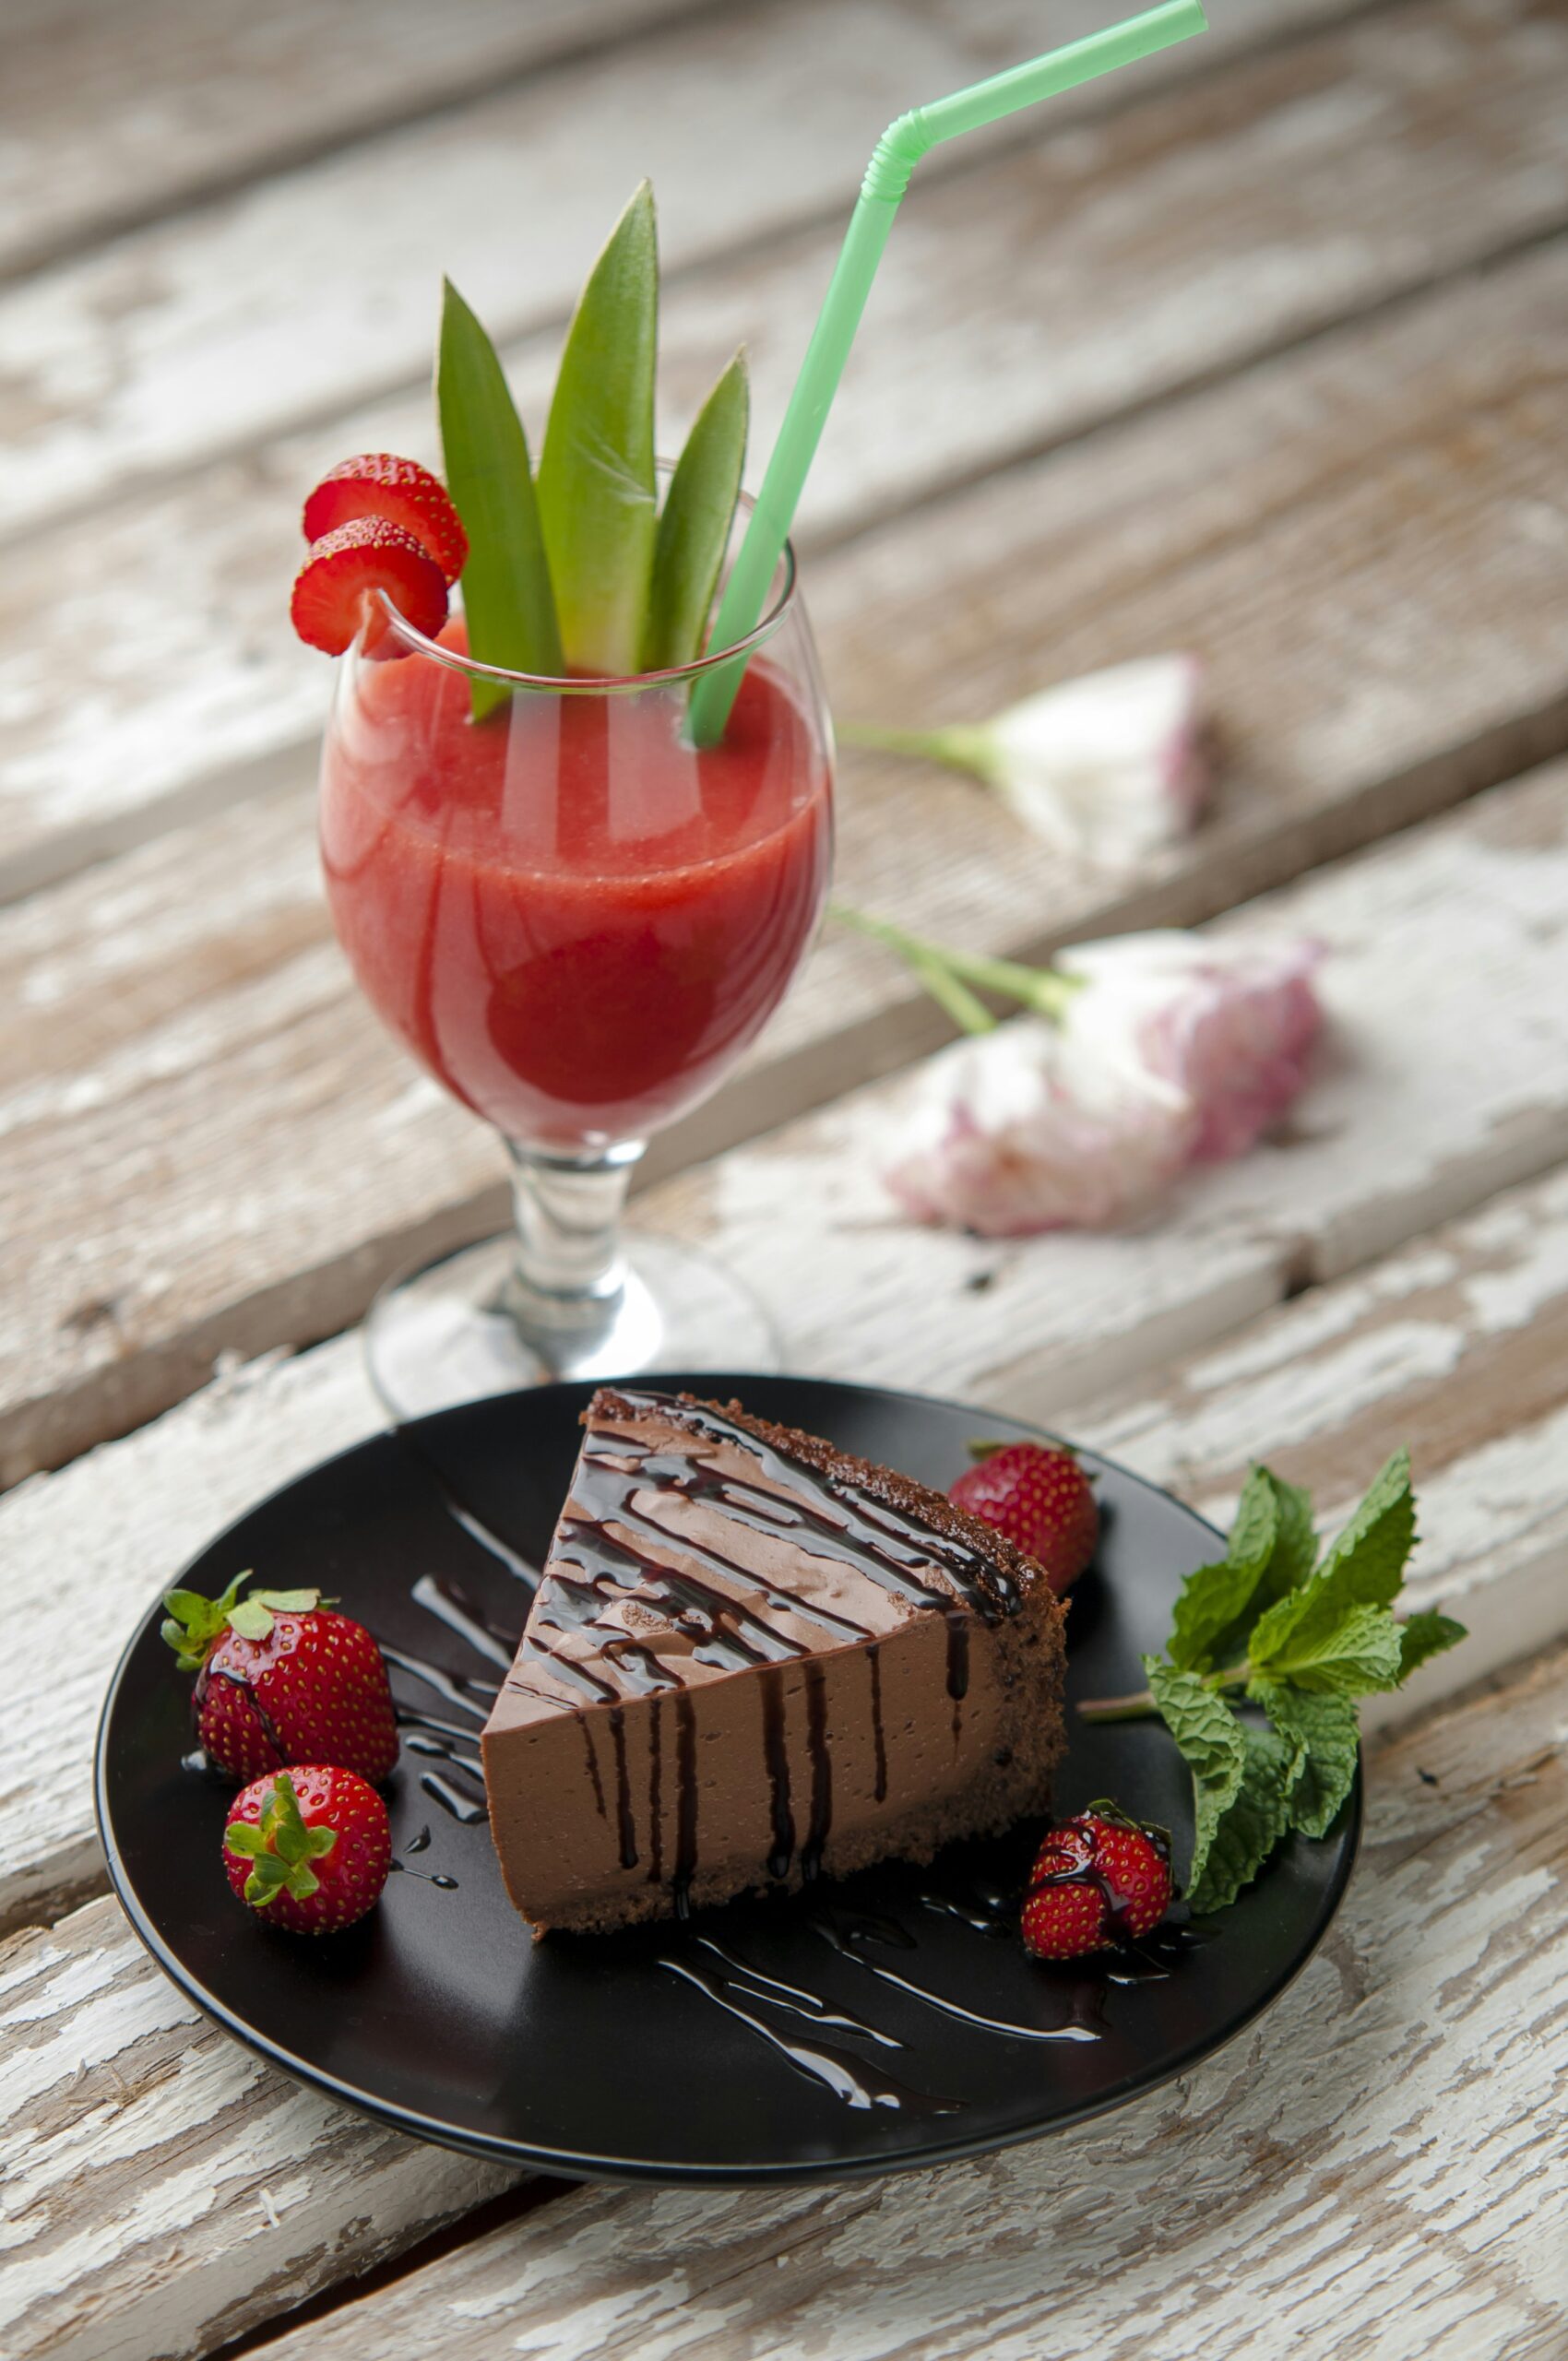 Can You Recommend A Nutritious And Refreshing Argentinean Dessert For Special Occasions?